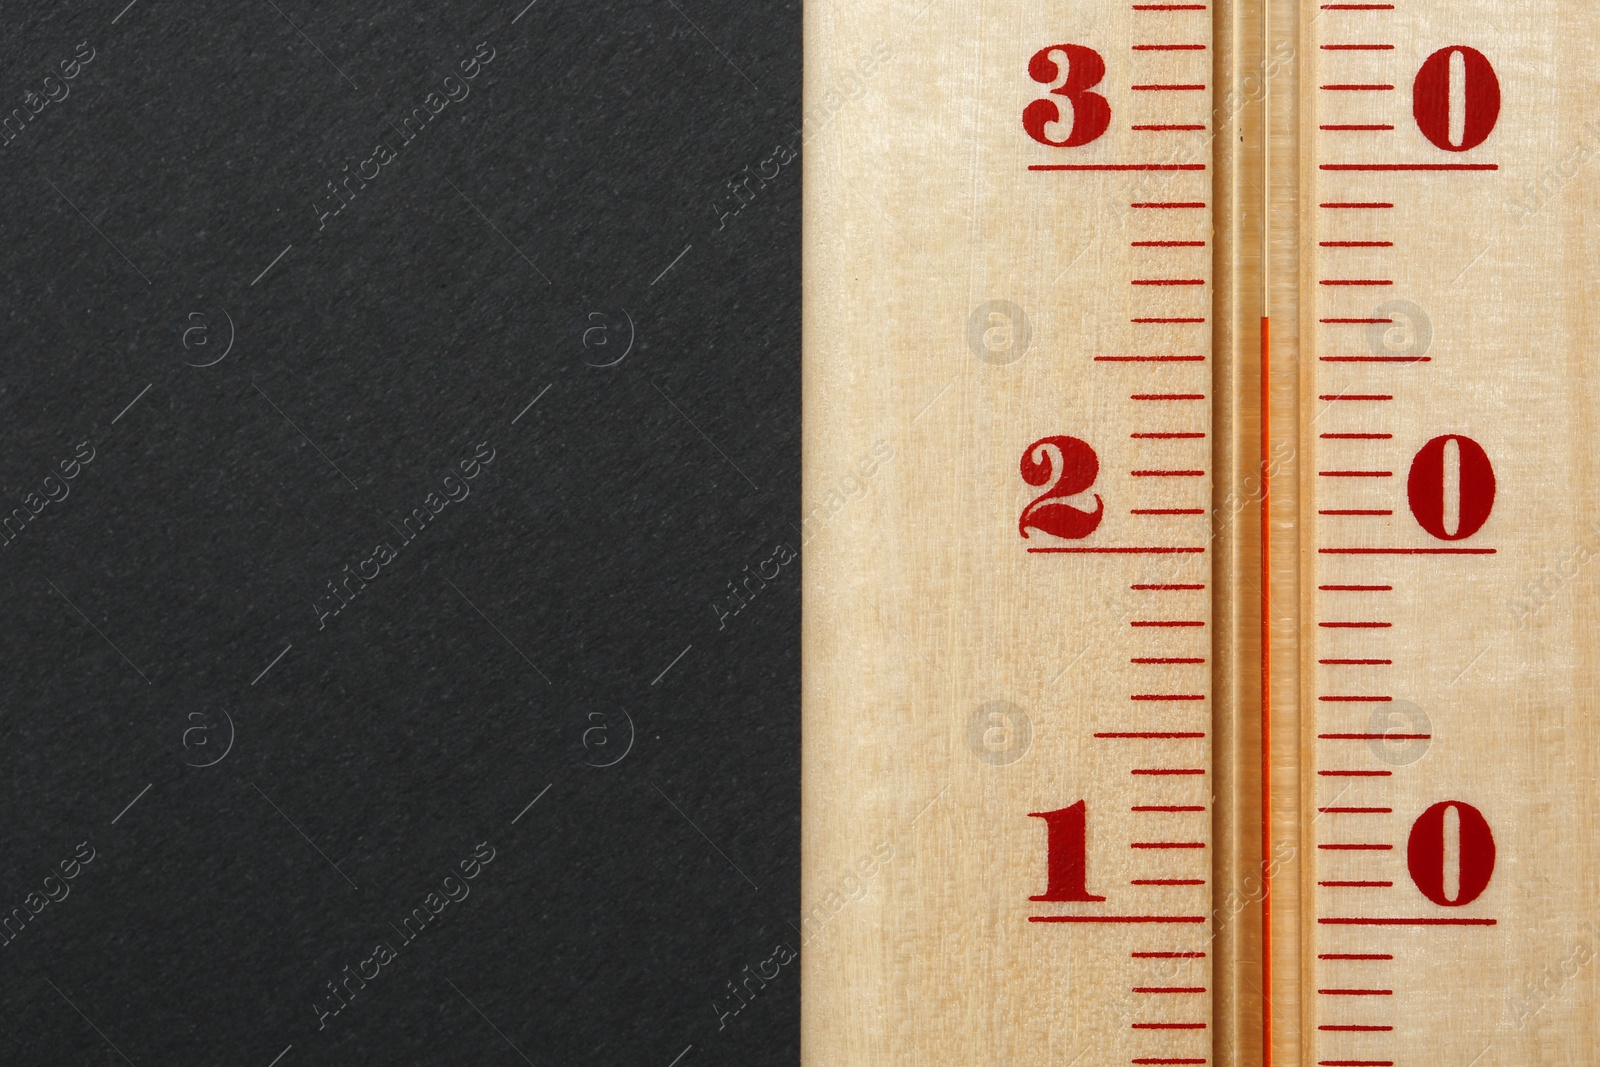 Photo of Weather thermometer on dark background, closeup view with space for text